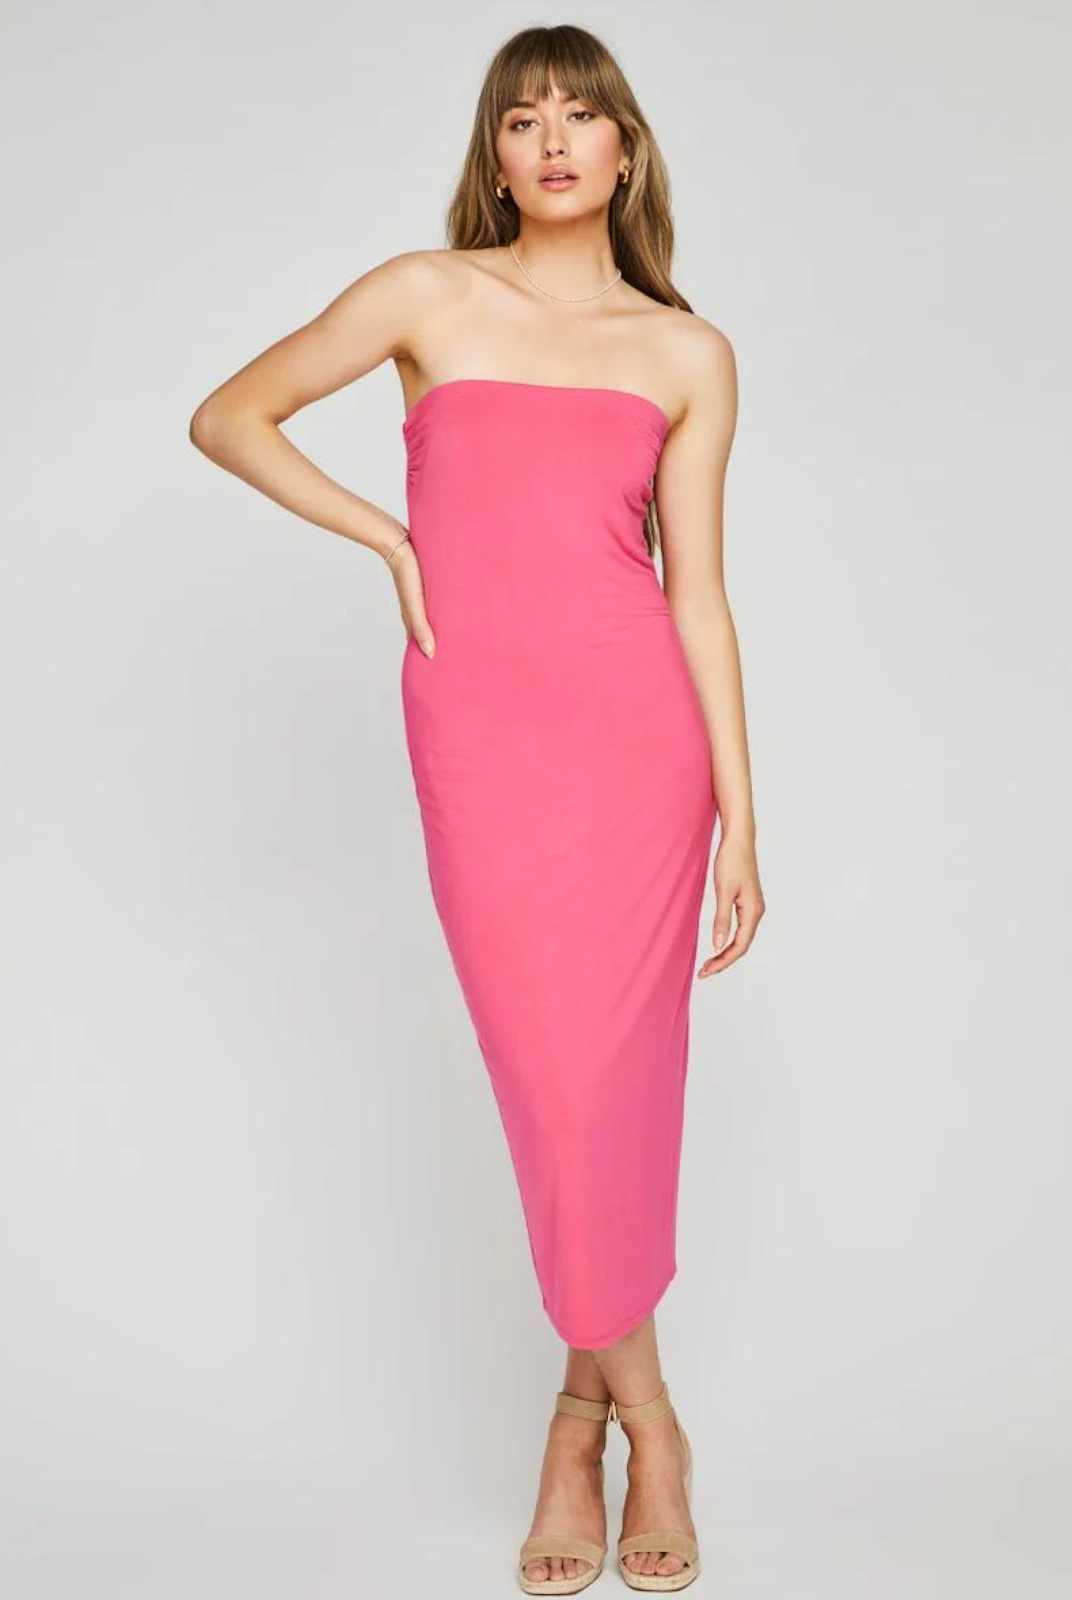 Gentle Fawn Amina Dress-Fuchsia. The Amina dress is made of super soft EcoVero rayon jersey and is fully lined for ease of wear. This flattering bodycon cut can be easily dressed up or down, and comes with removeable spaghetti straps for another option!